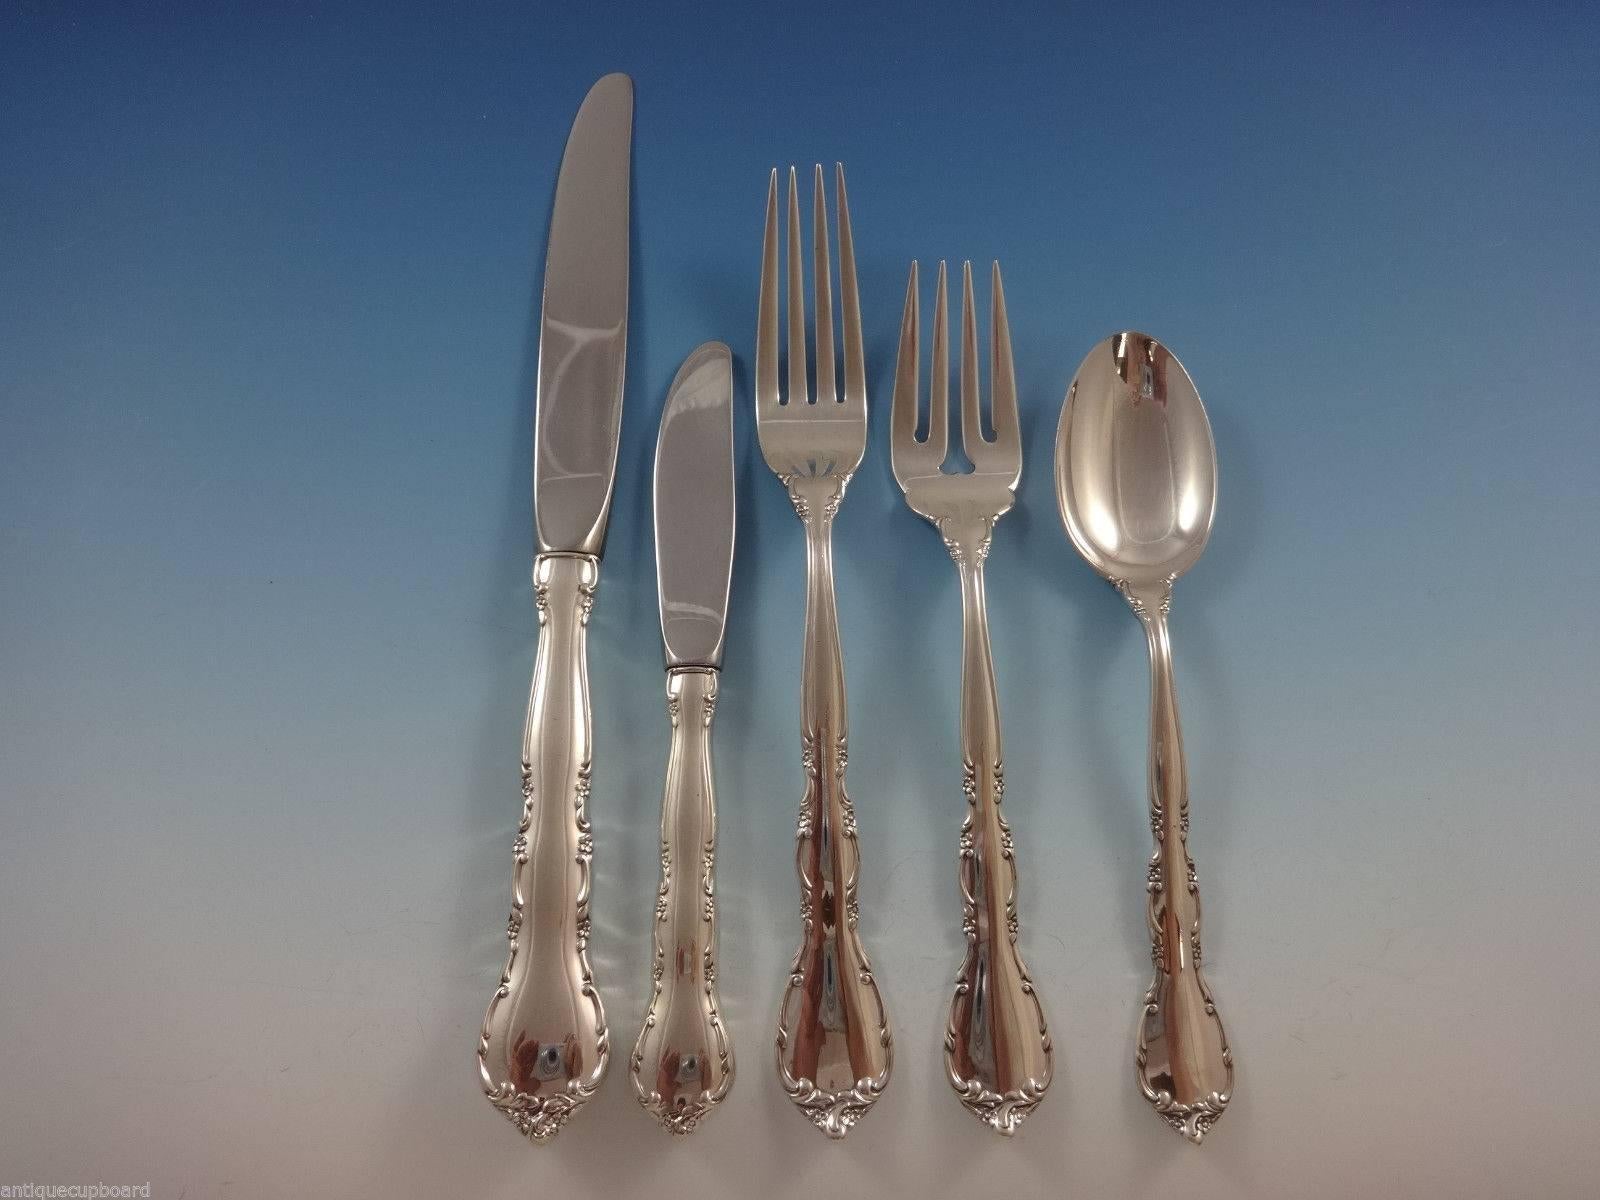 Mignonette by Lunt sterling silver flatware set - 44 pieces. This set includes:

Eight knives, 9 1/8